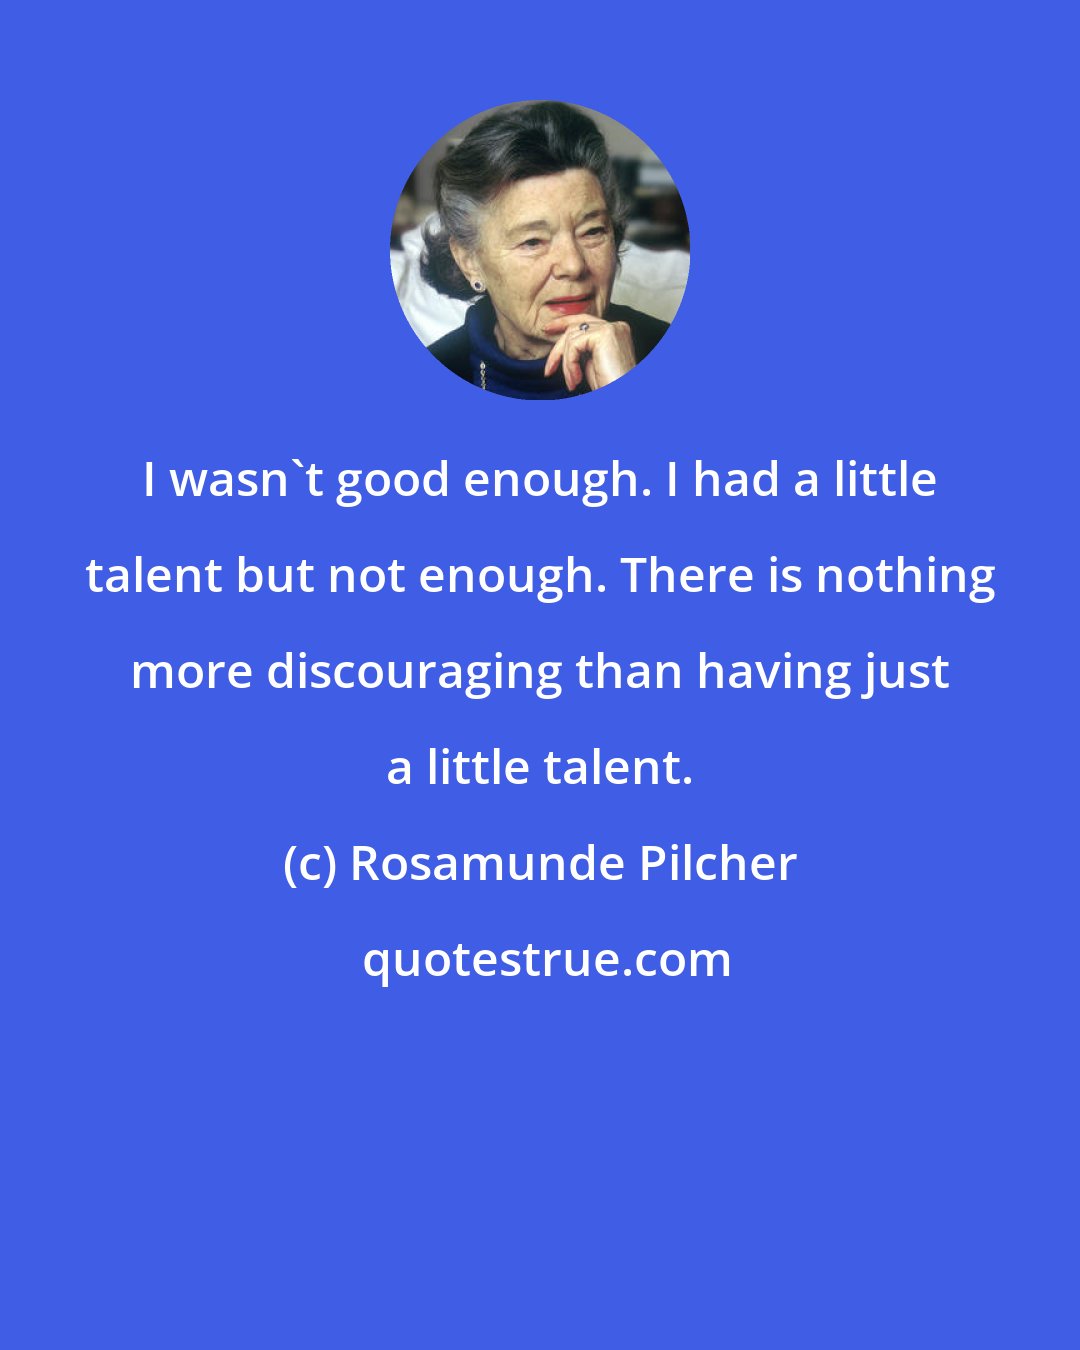 Rosamunde Pilcher: I wasn't good enough. I had a little talent but not enough. There is nothing more discouraging than having just a little talent.